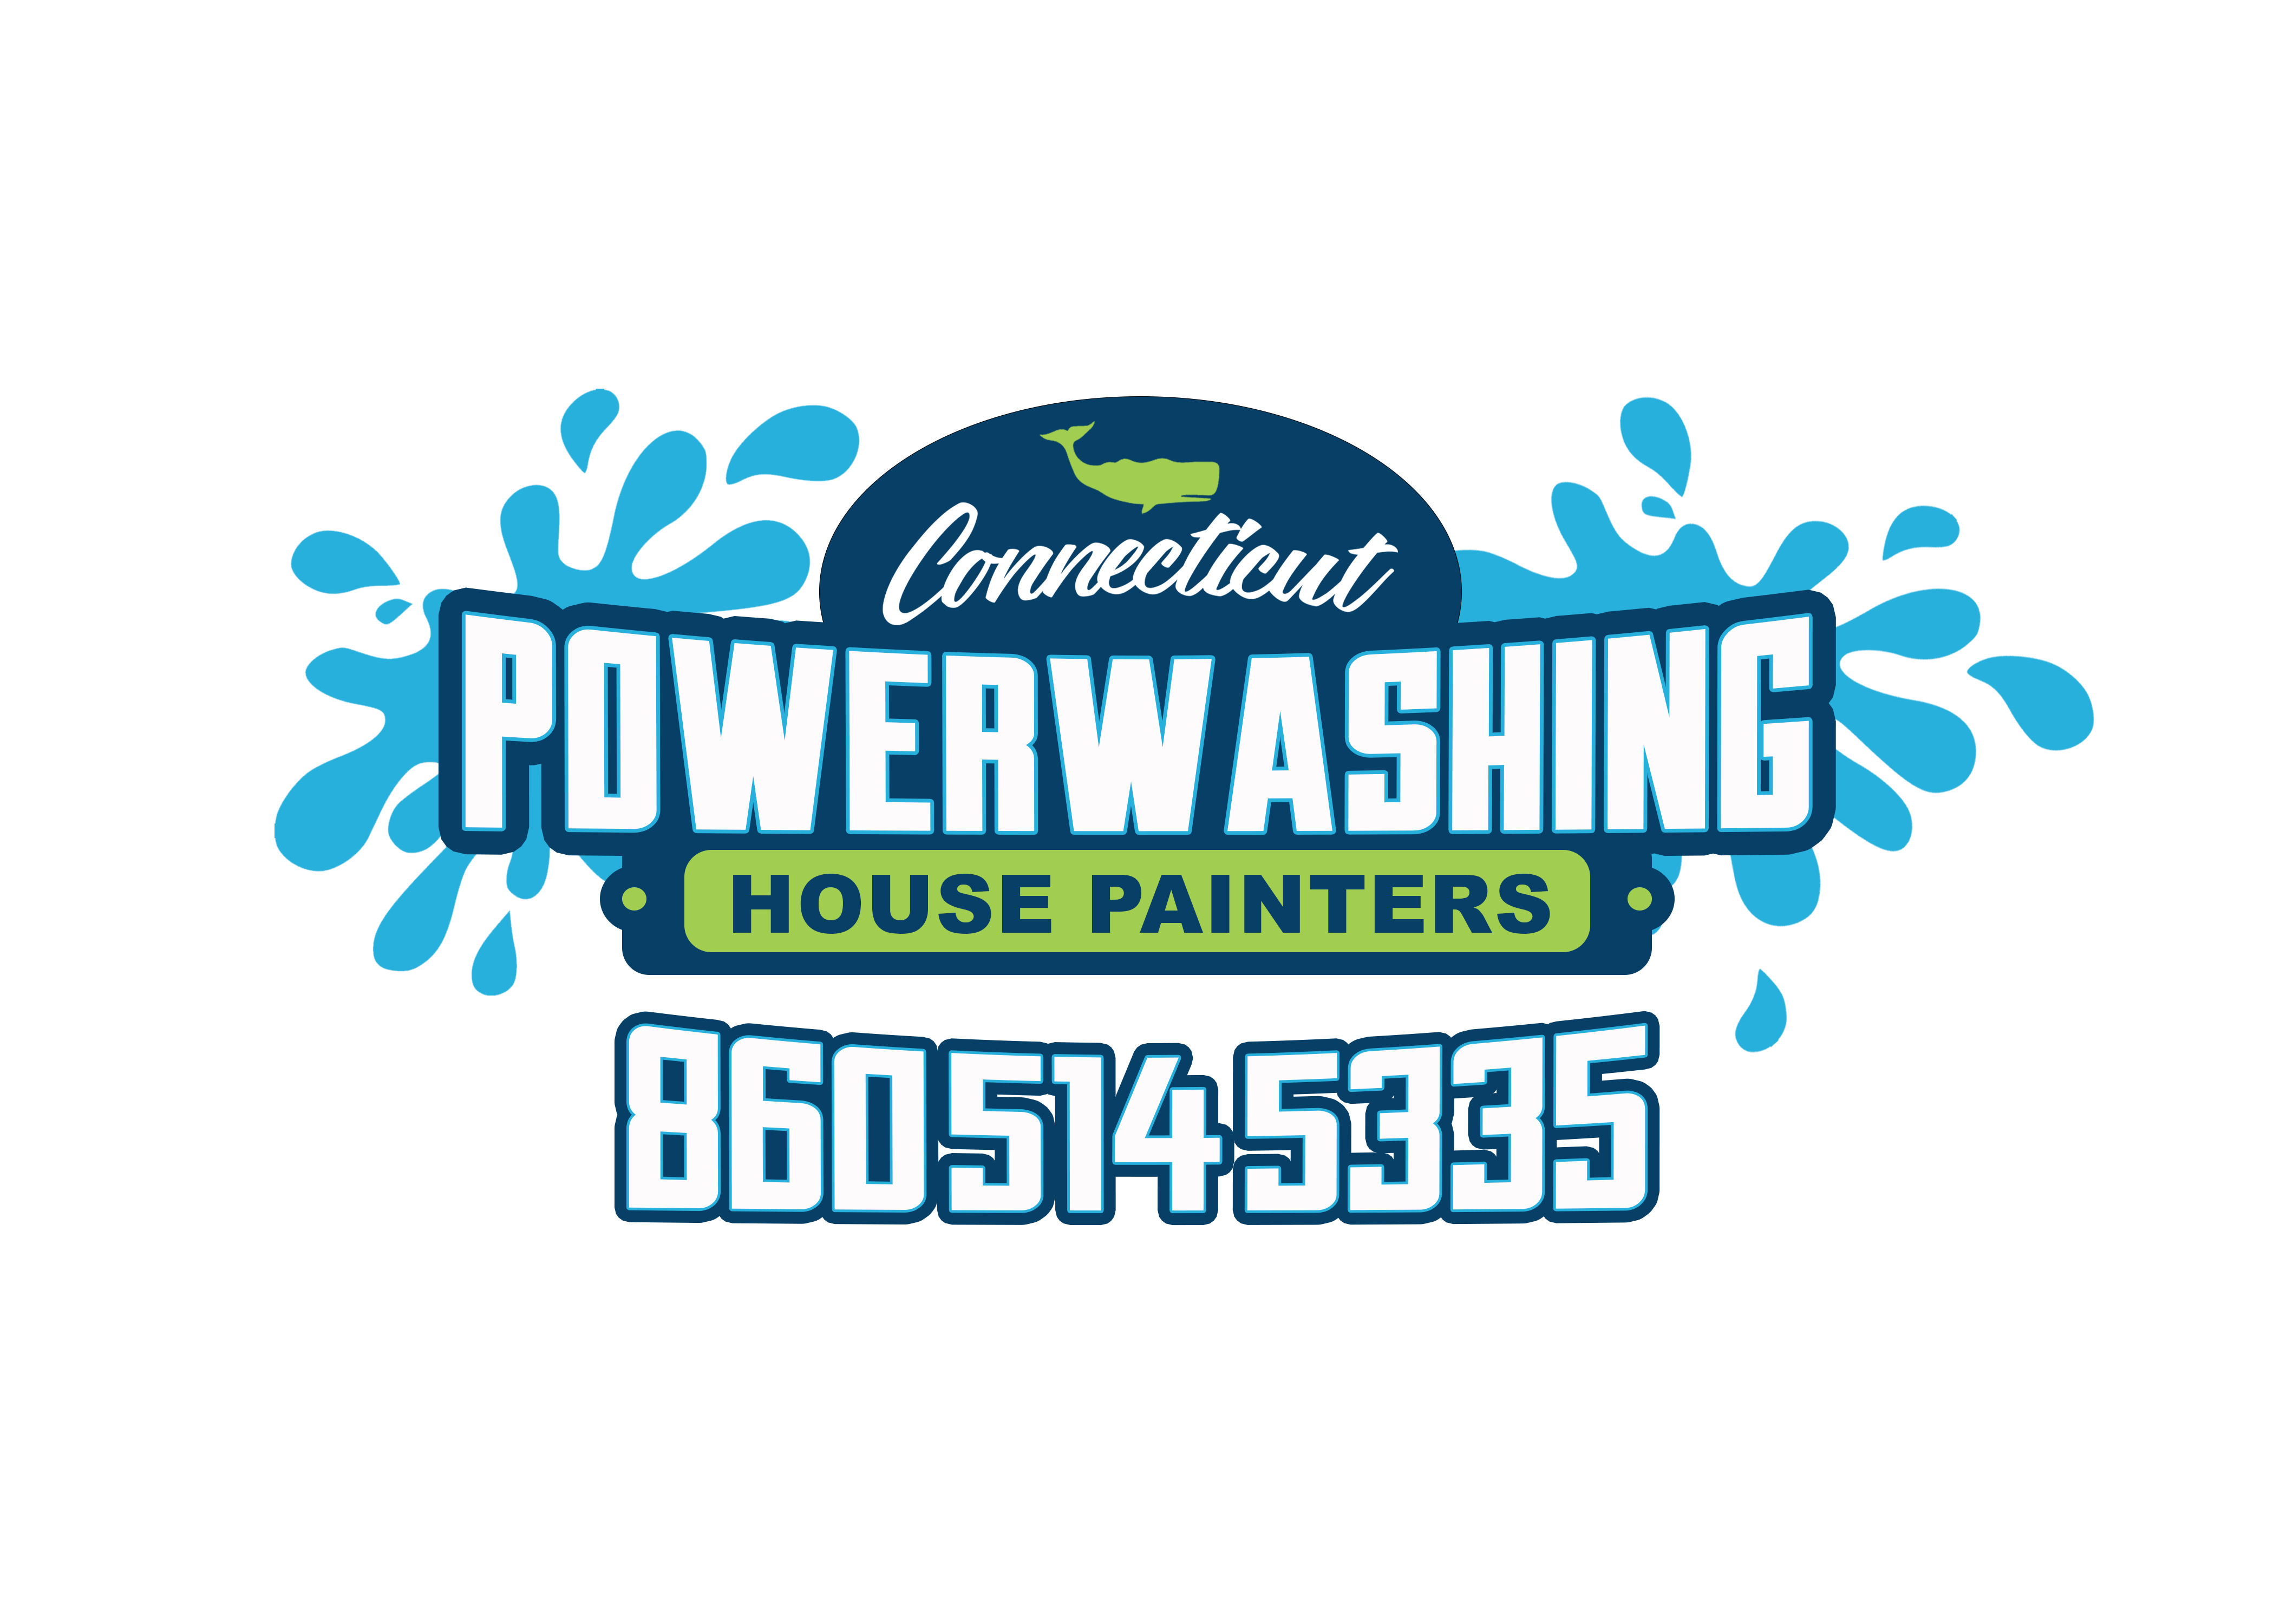 CT Power Washing & Roof Cleaning